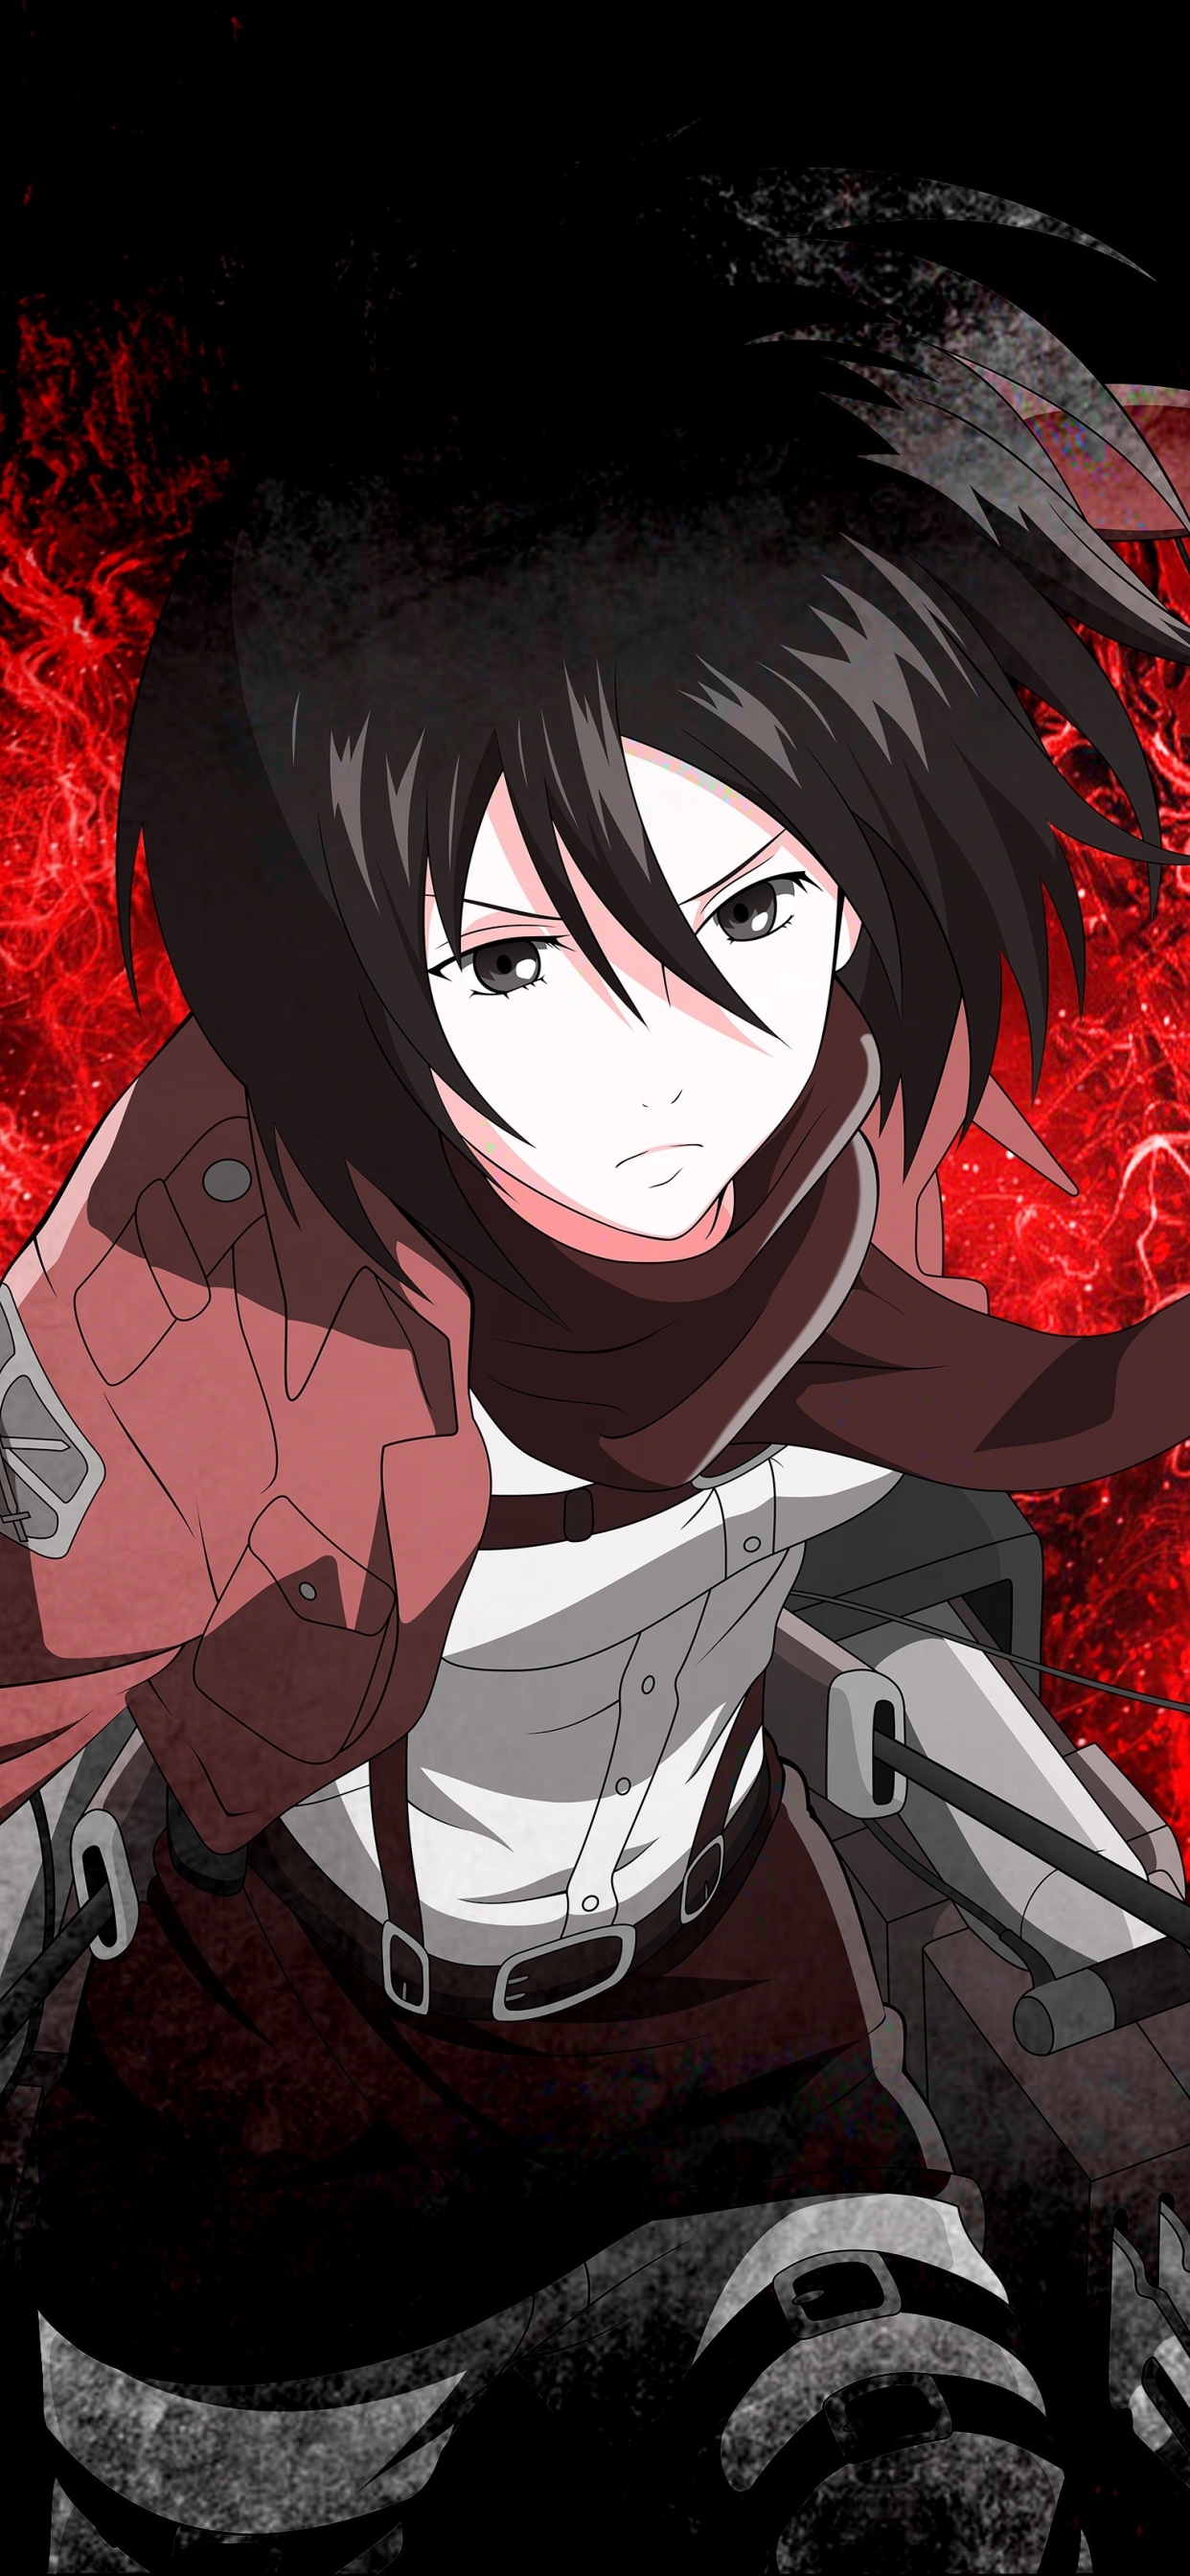 1242x26 Mikasa Ackerman 5k Iphone Xs Max Wallpaper Hd Anime 4k Wallpapers Images Photos And Background Wallpapers Den